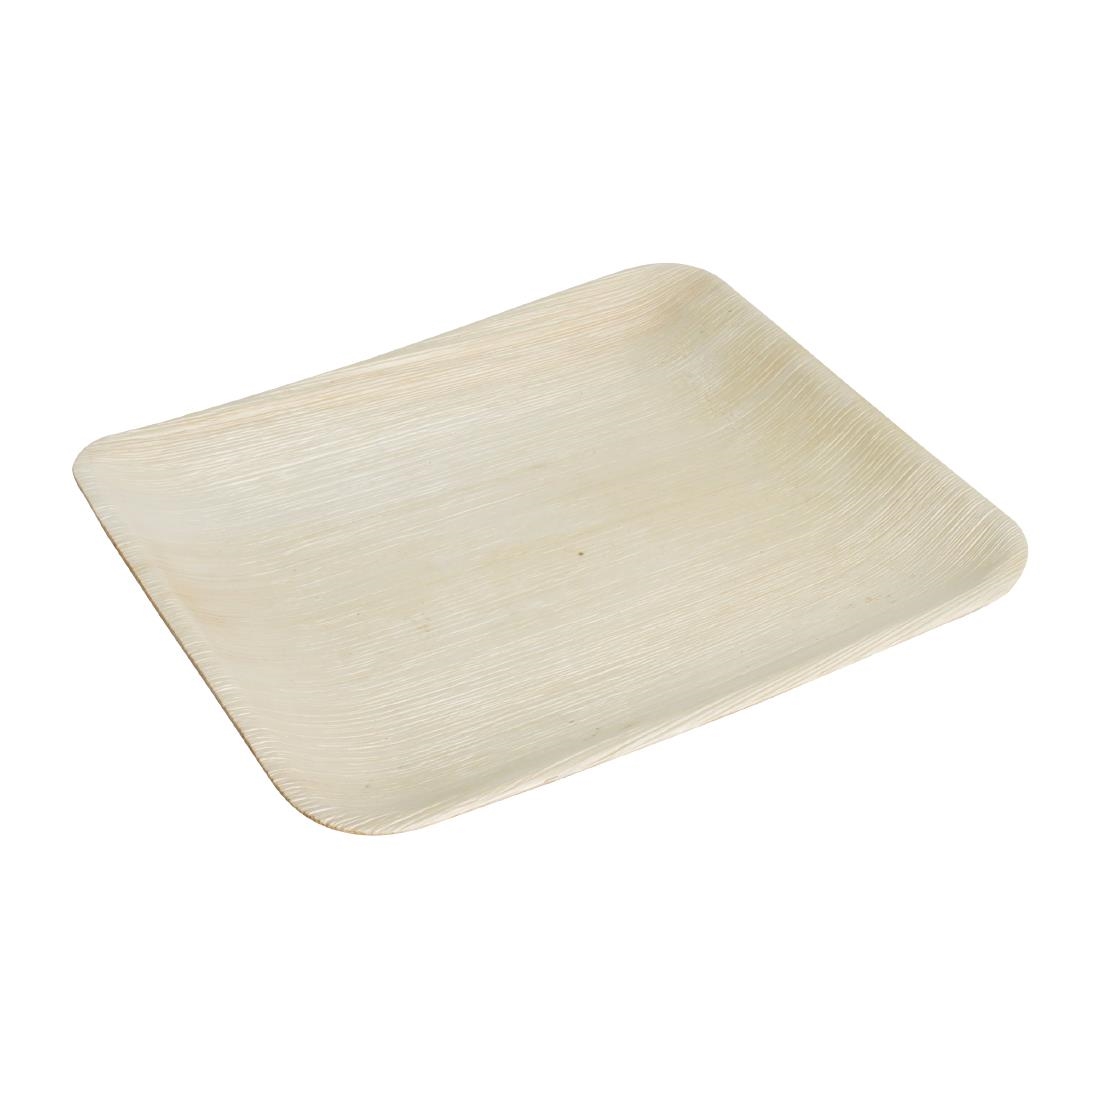 Fiesta Green Biodegradable Palm Leaf Plates Square 200mm (Pack of 100)